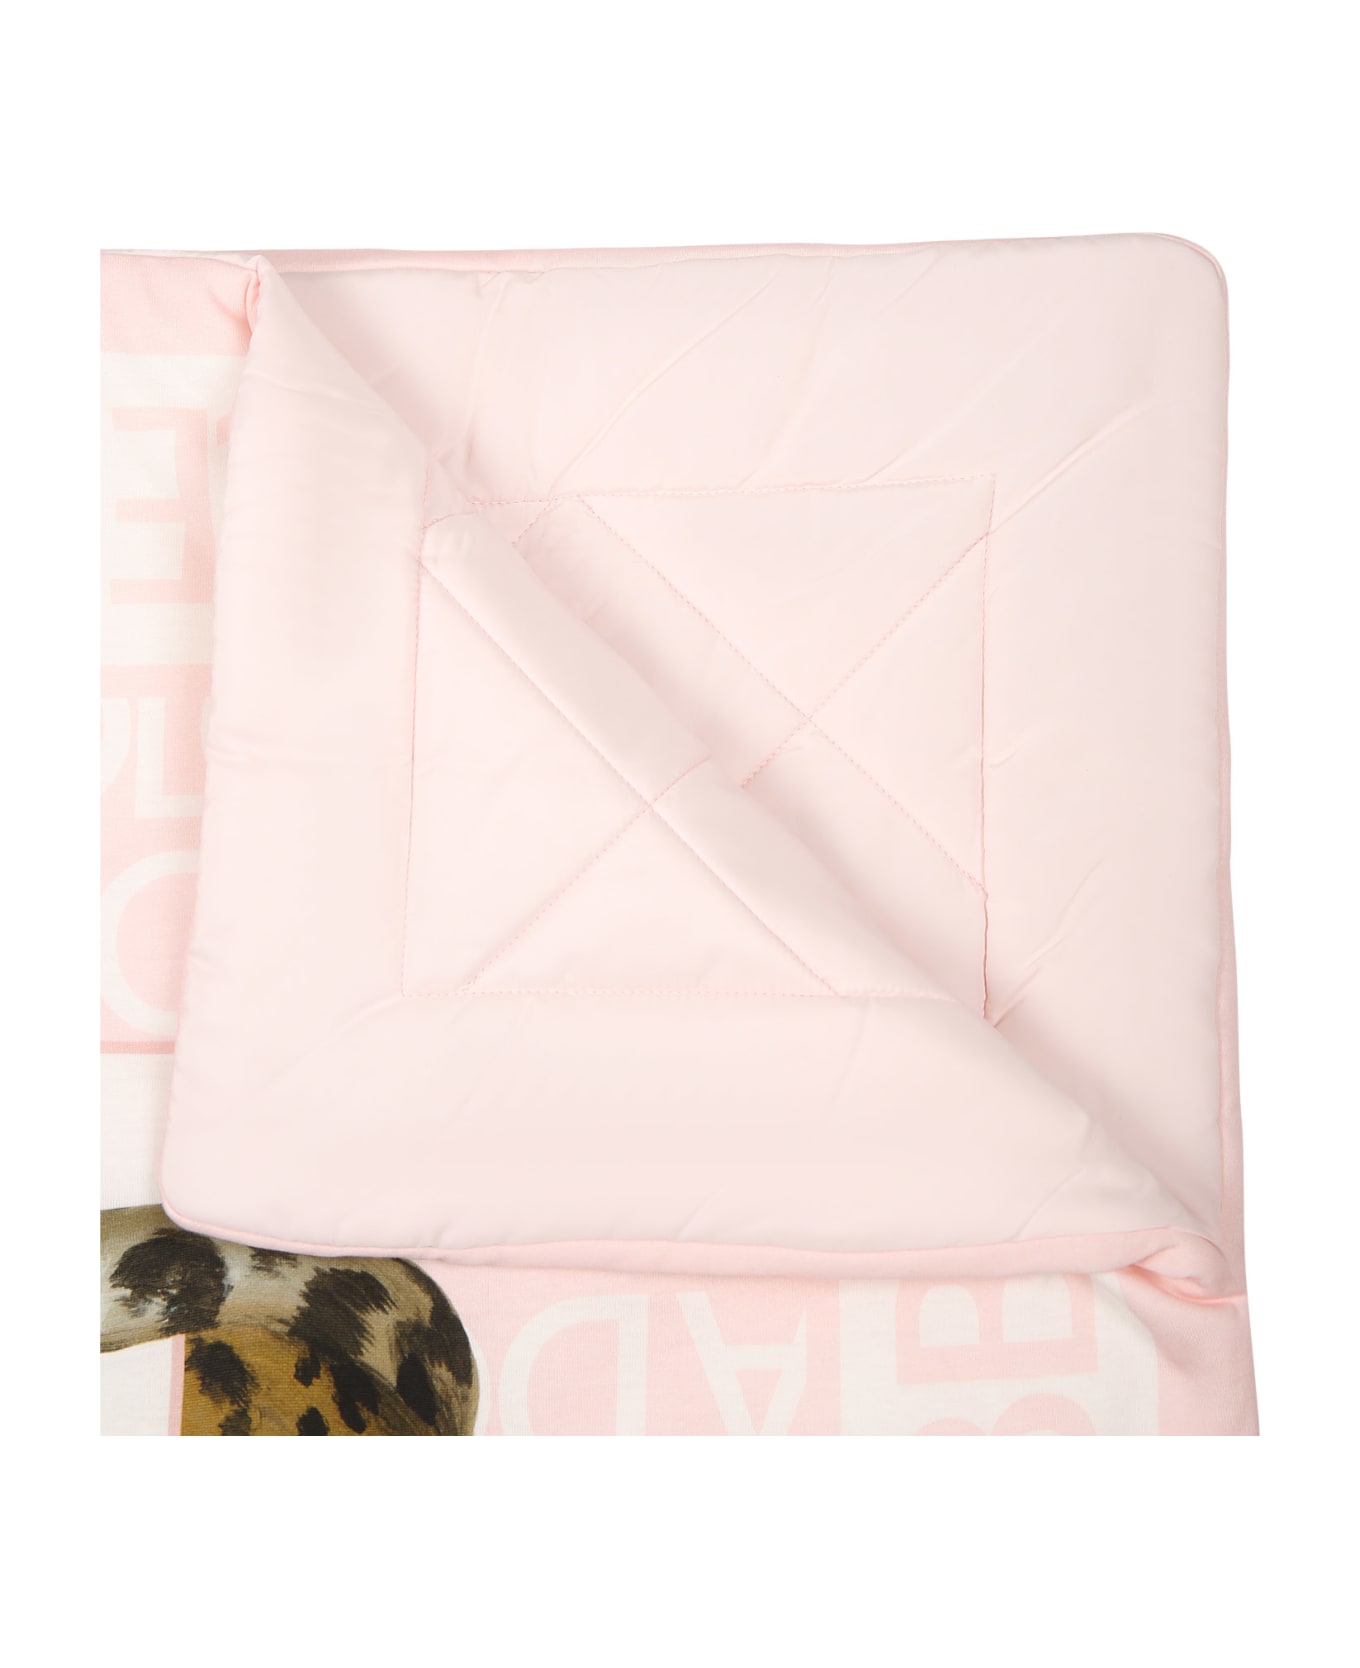 Dolce & Gabbana Pink Blanket For Baby Girl With Logomania And Leopard Print - Pink アクセサリー＆ギフト